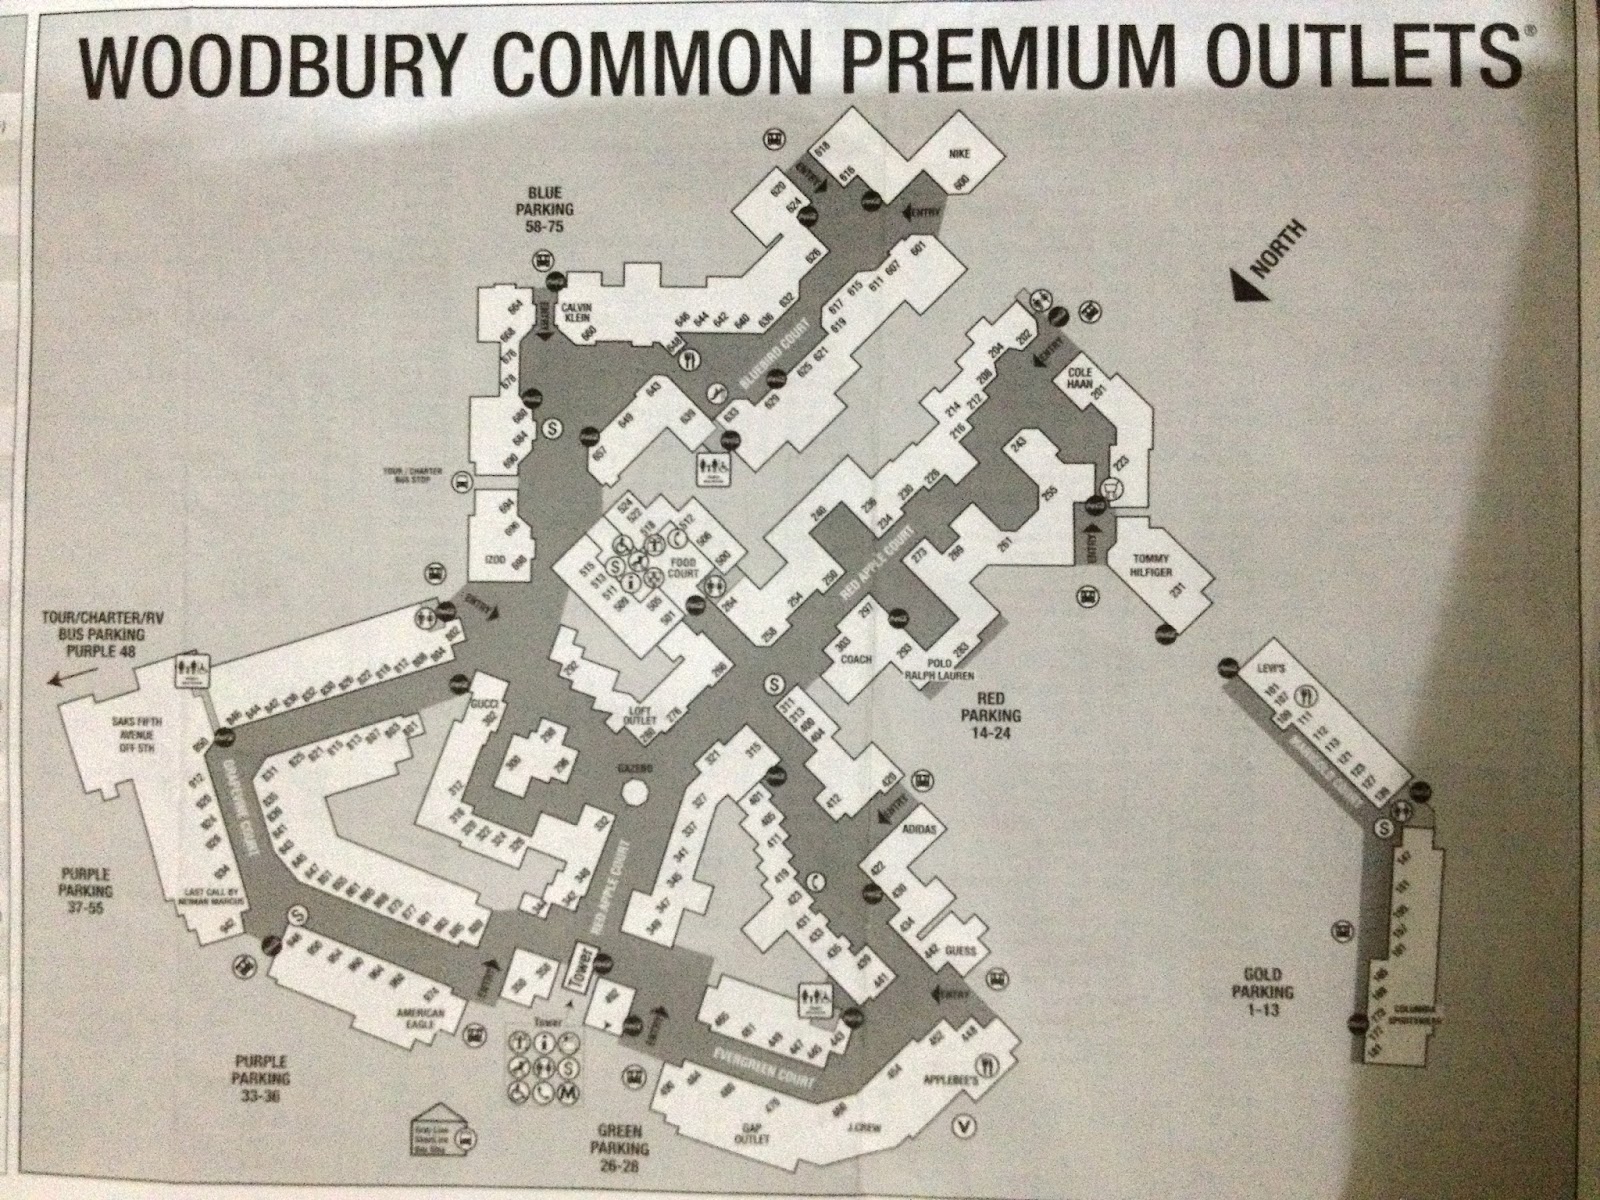 Valentin's blog: Extra: Woodbury Common Premium Outlets